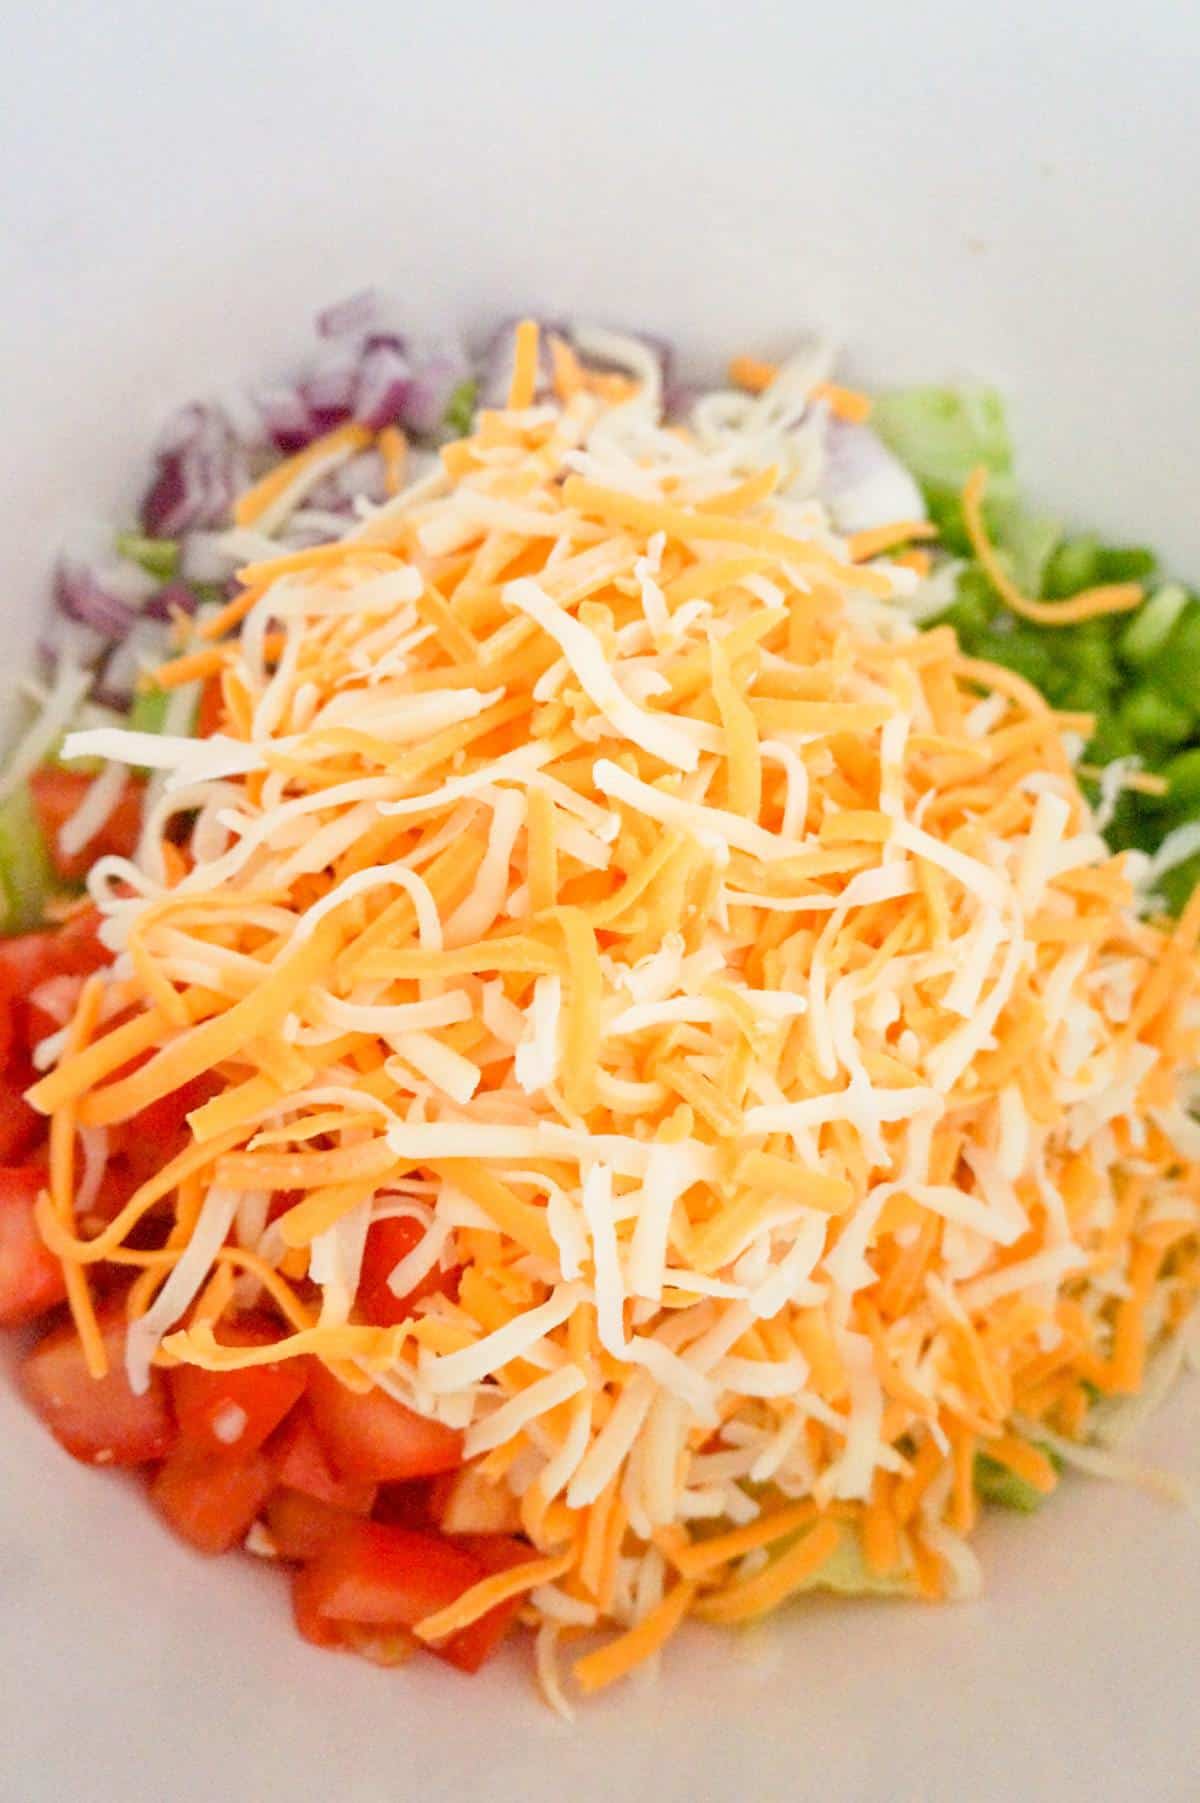 shredded cheese on top of salad in a mixing bowl